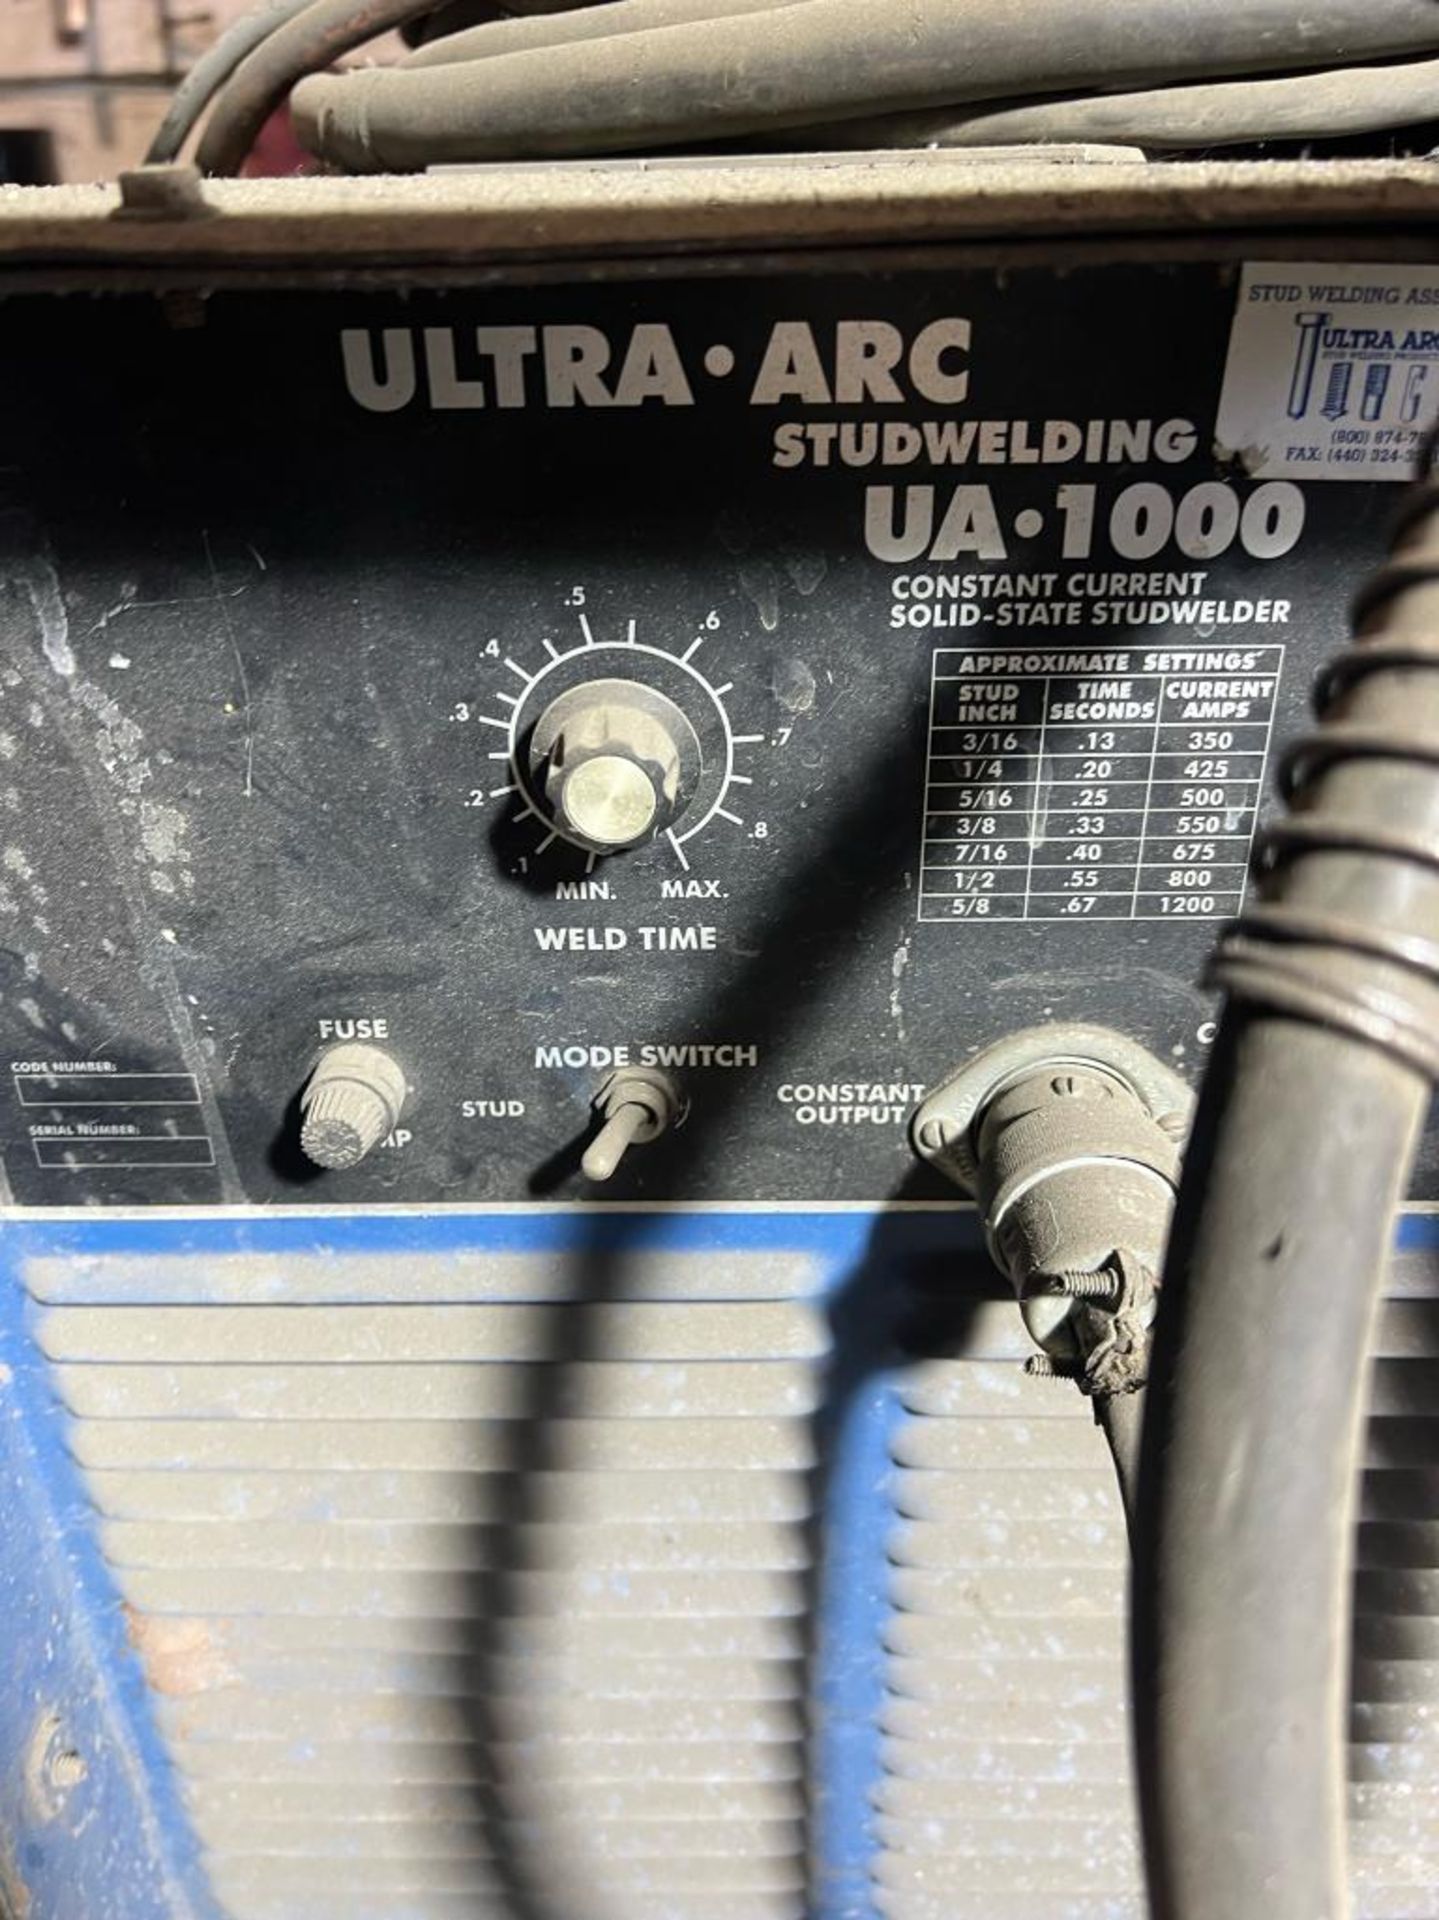 Ultra-Arc Stud Welder, UA-1000, with Leads, Single Phase - Image 3 of 4